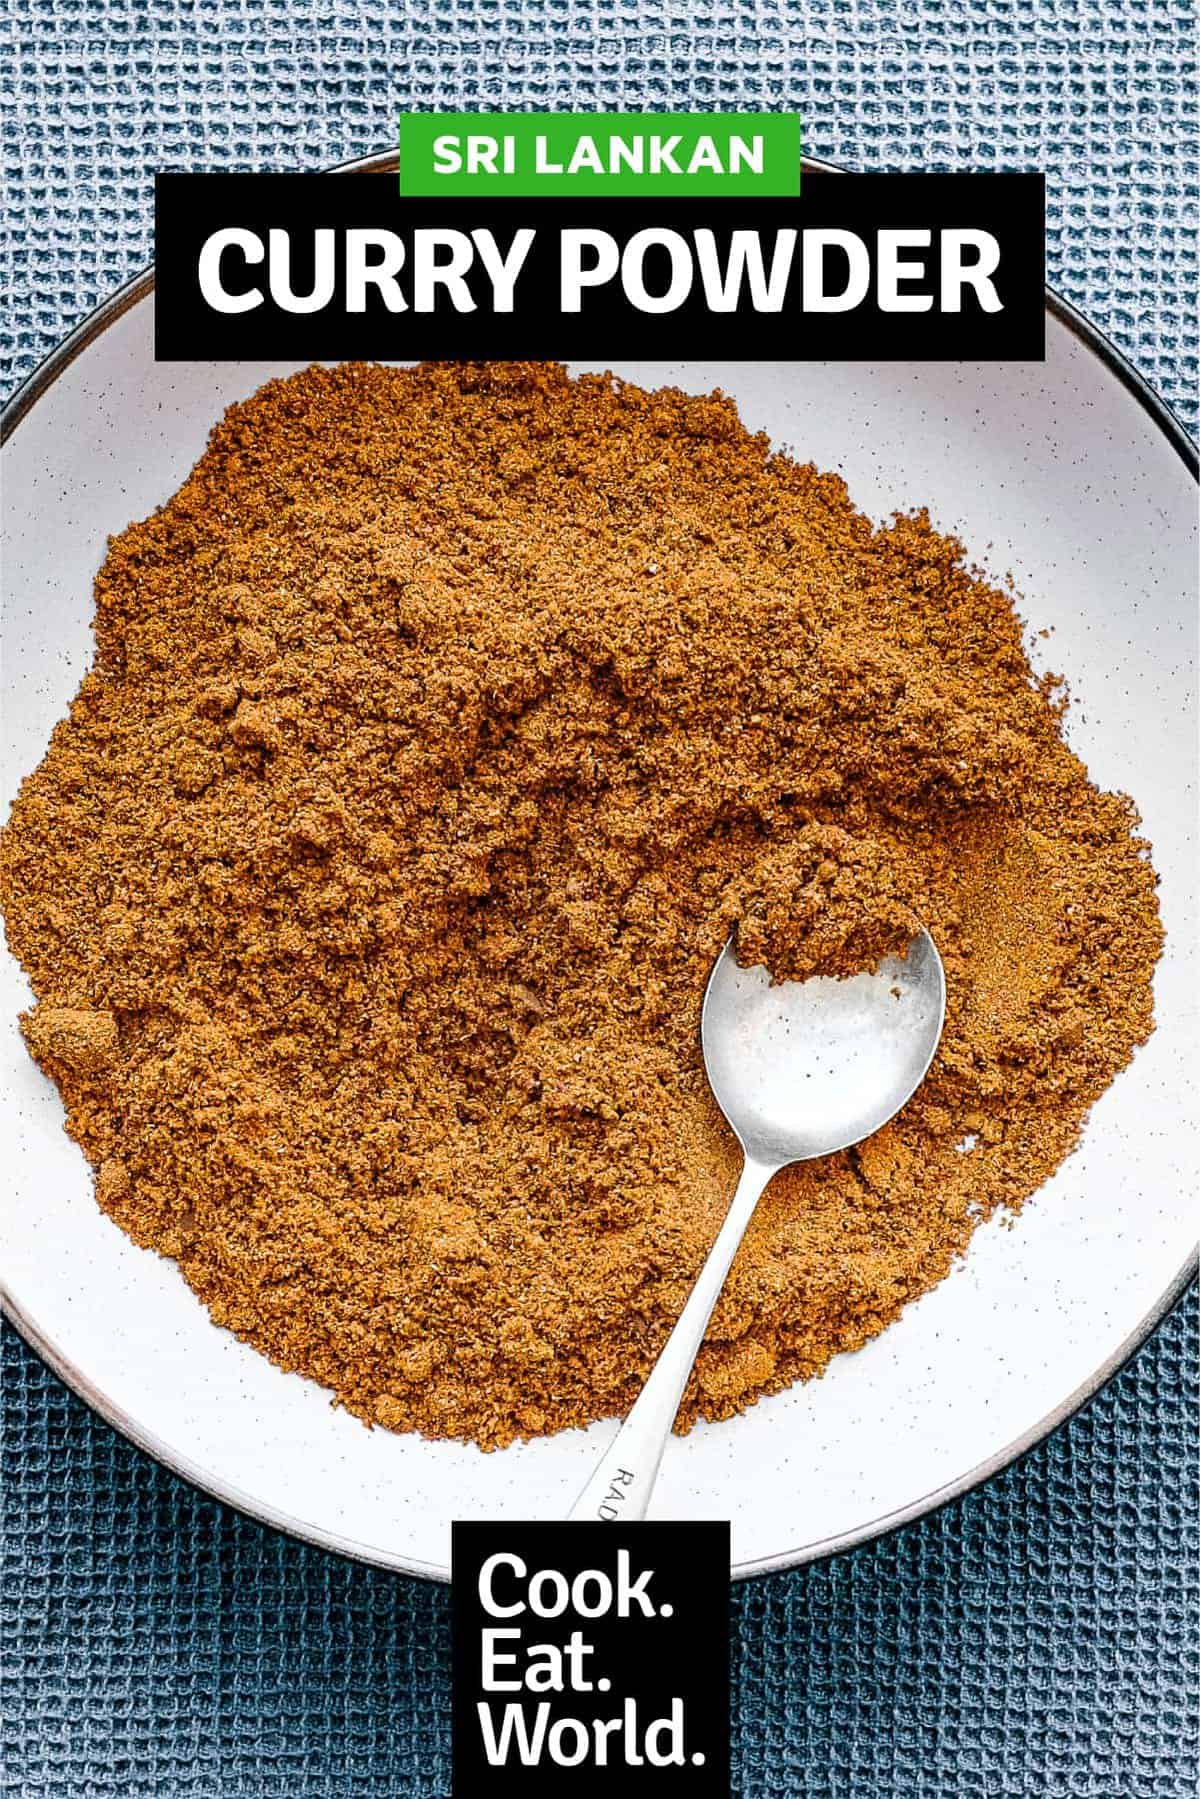 A small bowl of Sri Lankan curry powder with a spoon